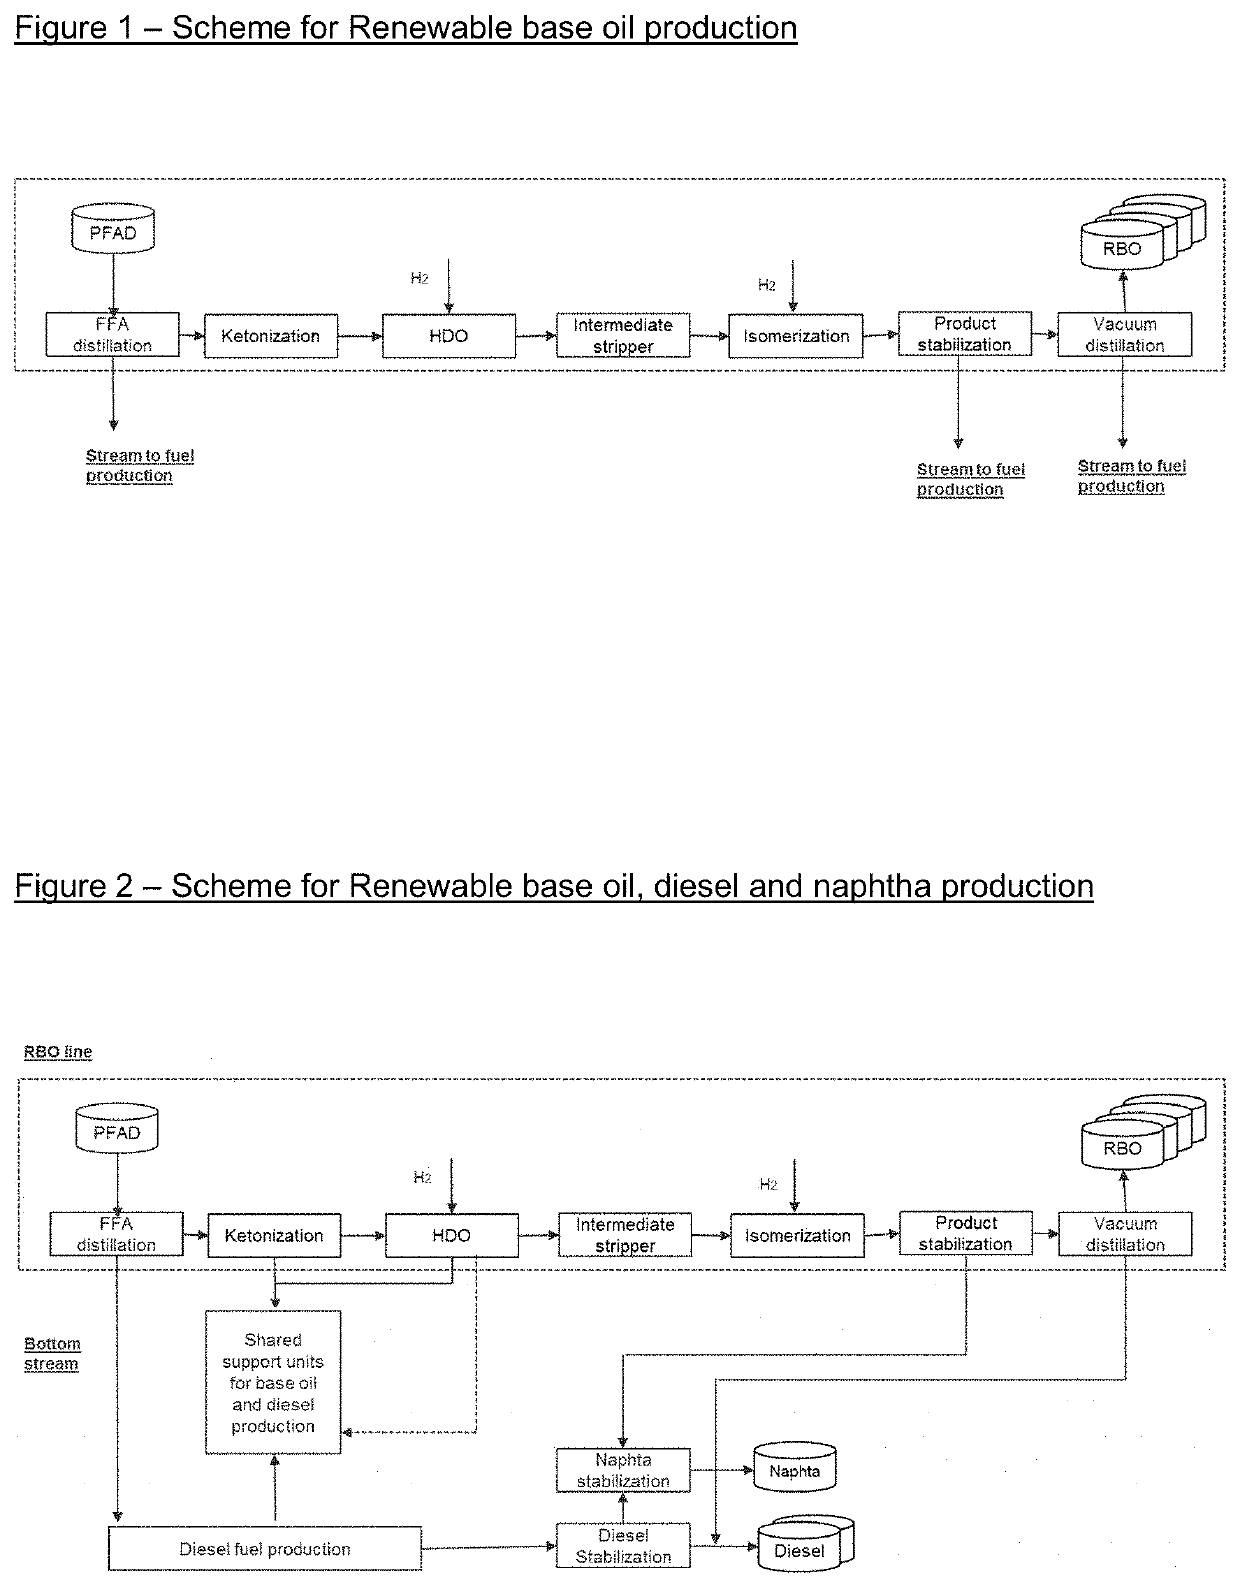 Process for the production of renewable base oil, diesel and naphtha